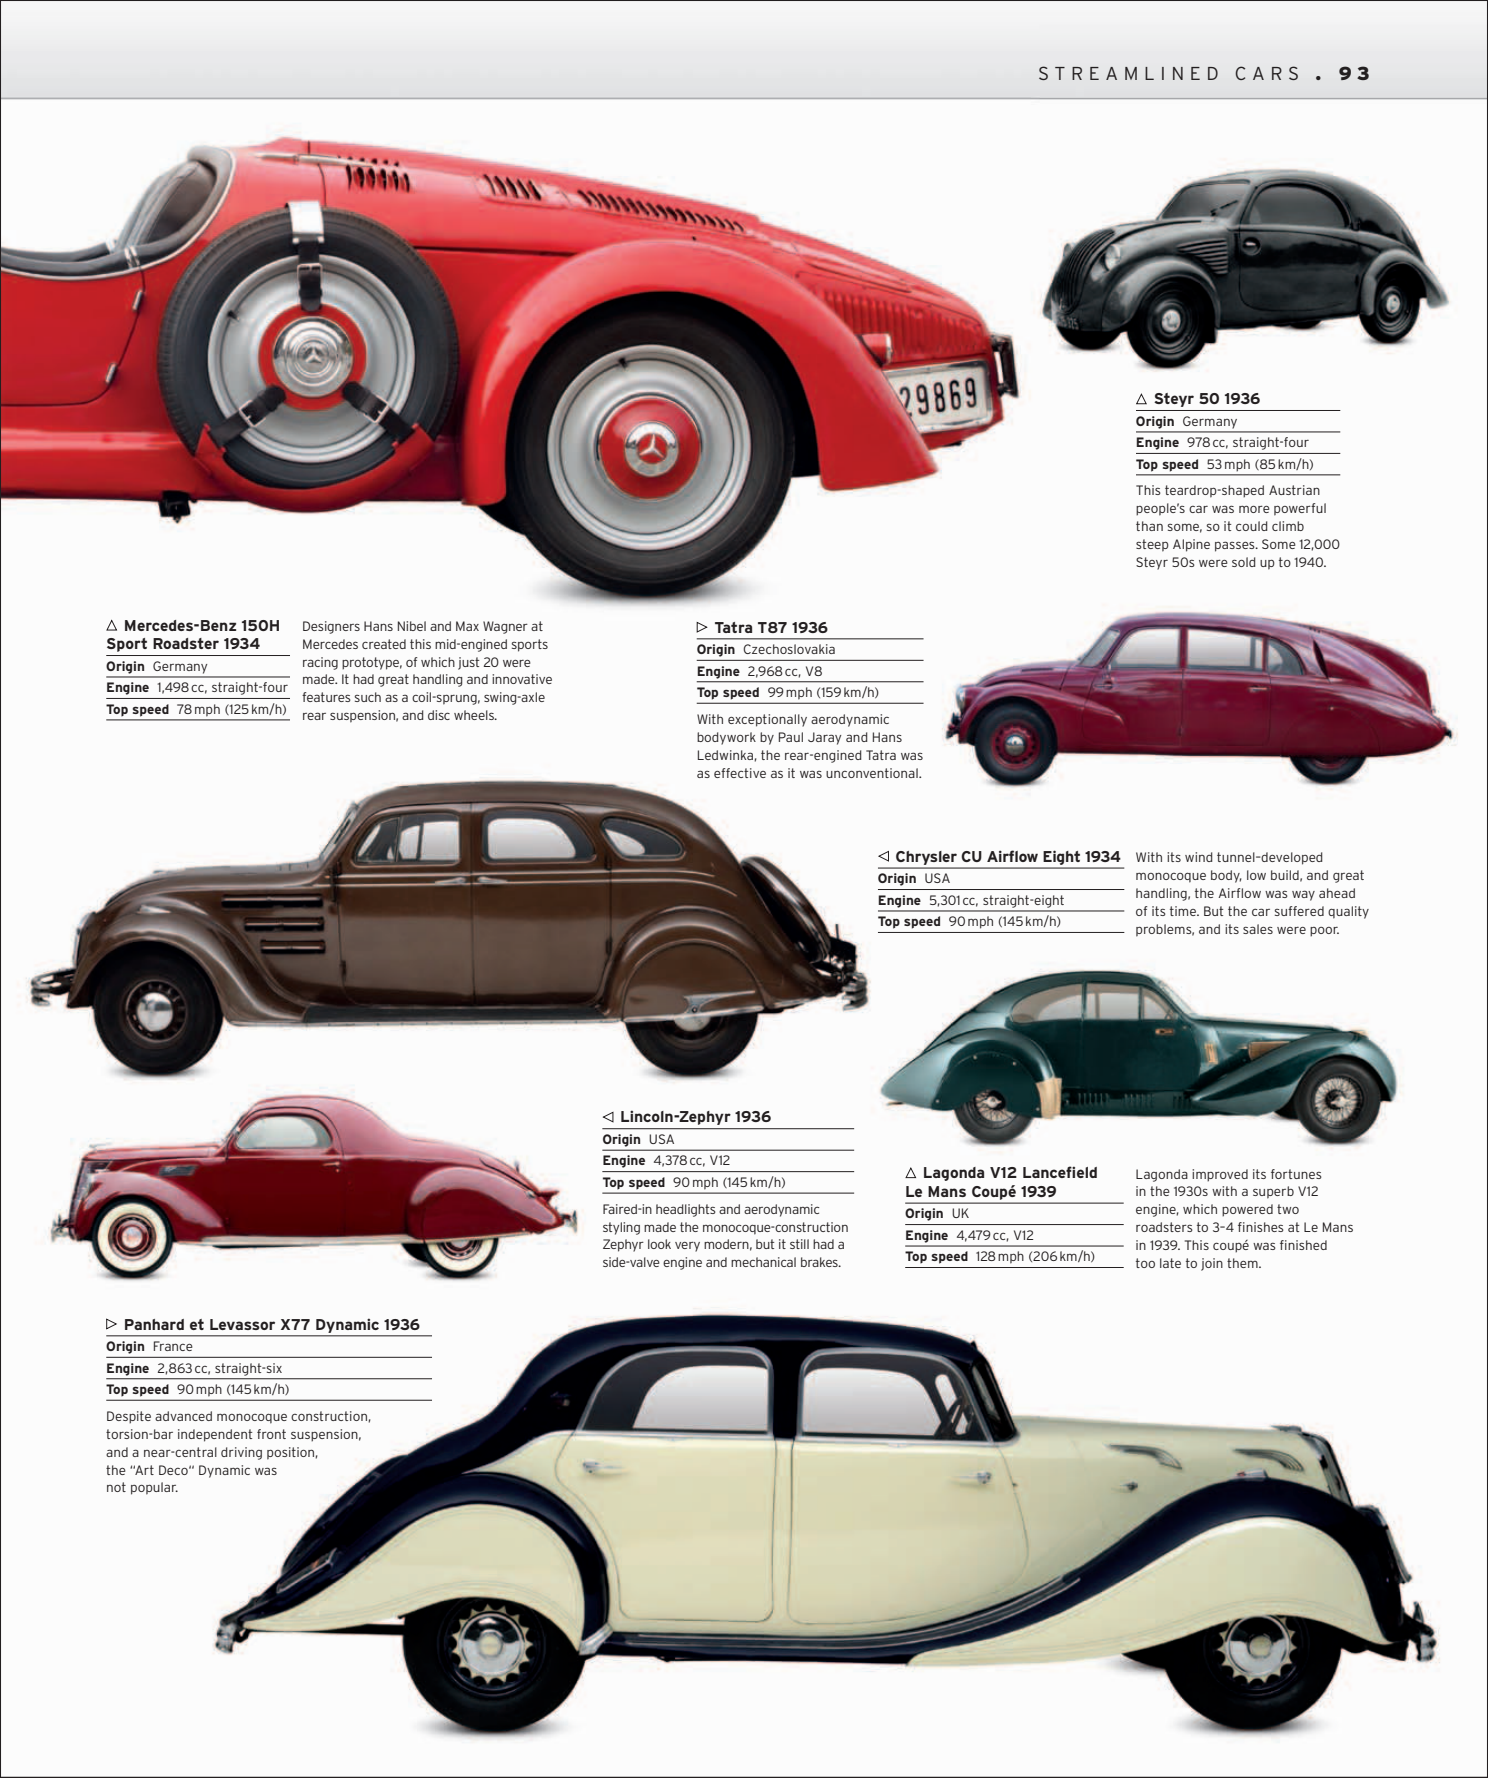 Car%20-%20The%20Definitive%20Visual%20History%20of%20the%20Automobile_095.png